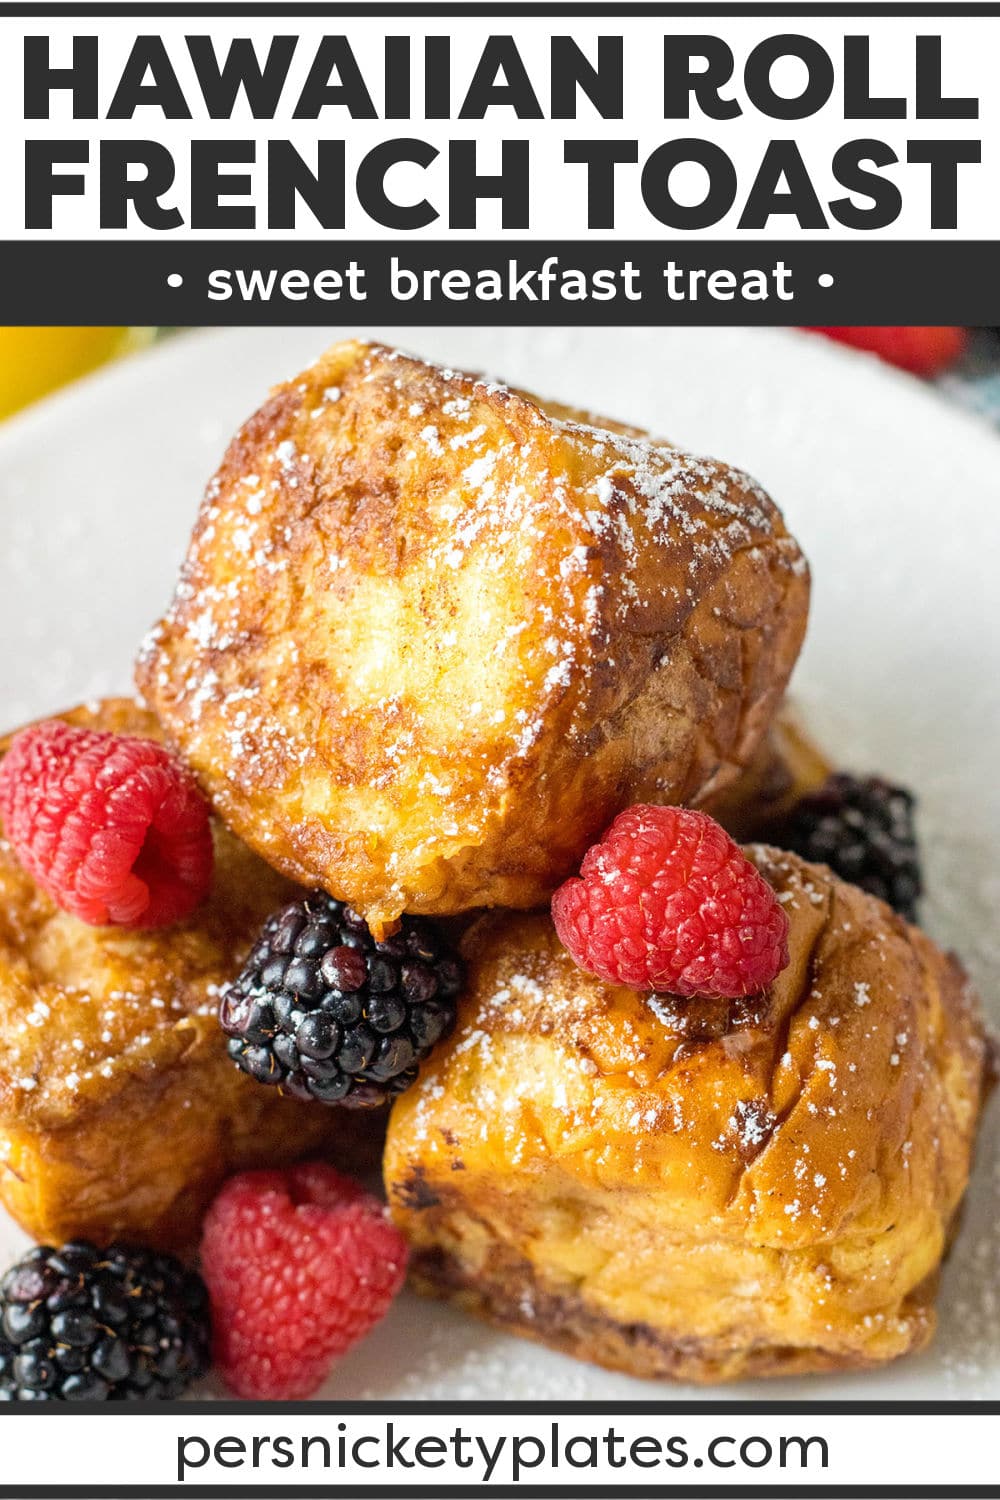 Hawaiian Rolls French Toast is made by soaking sweet hawaiian bread in an egg mixture and then cooking it up until golden brown on all sides. Sprinkled with powdered sugar and paired with fresh berries before serving, this easy breakfast recipe is perfect for brunch, the weekend, or special occasions. | www.persnicketyplates.com